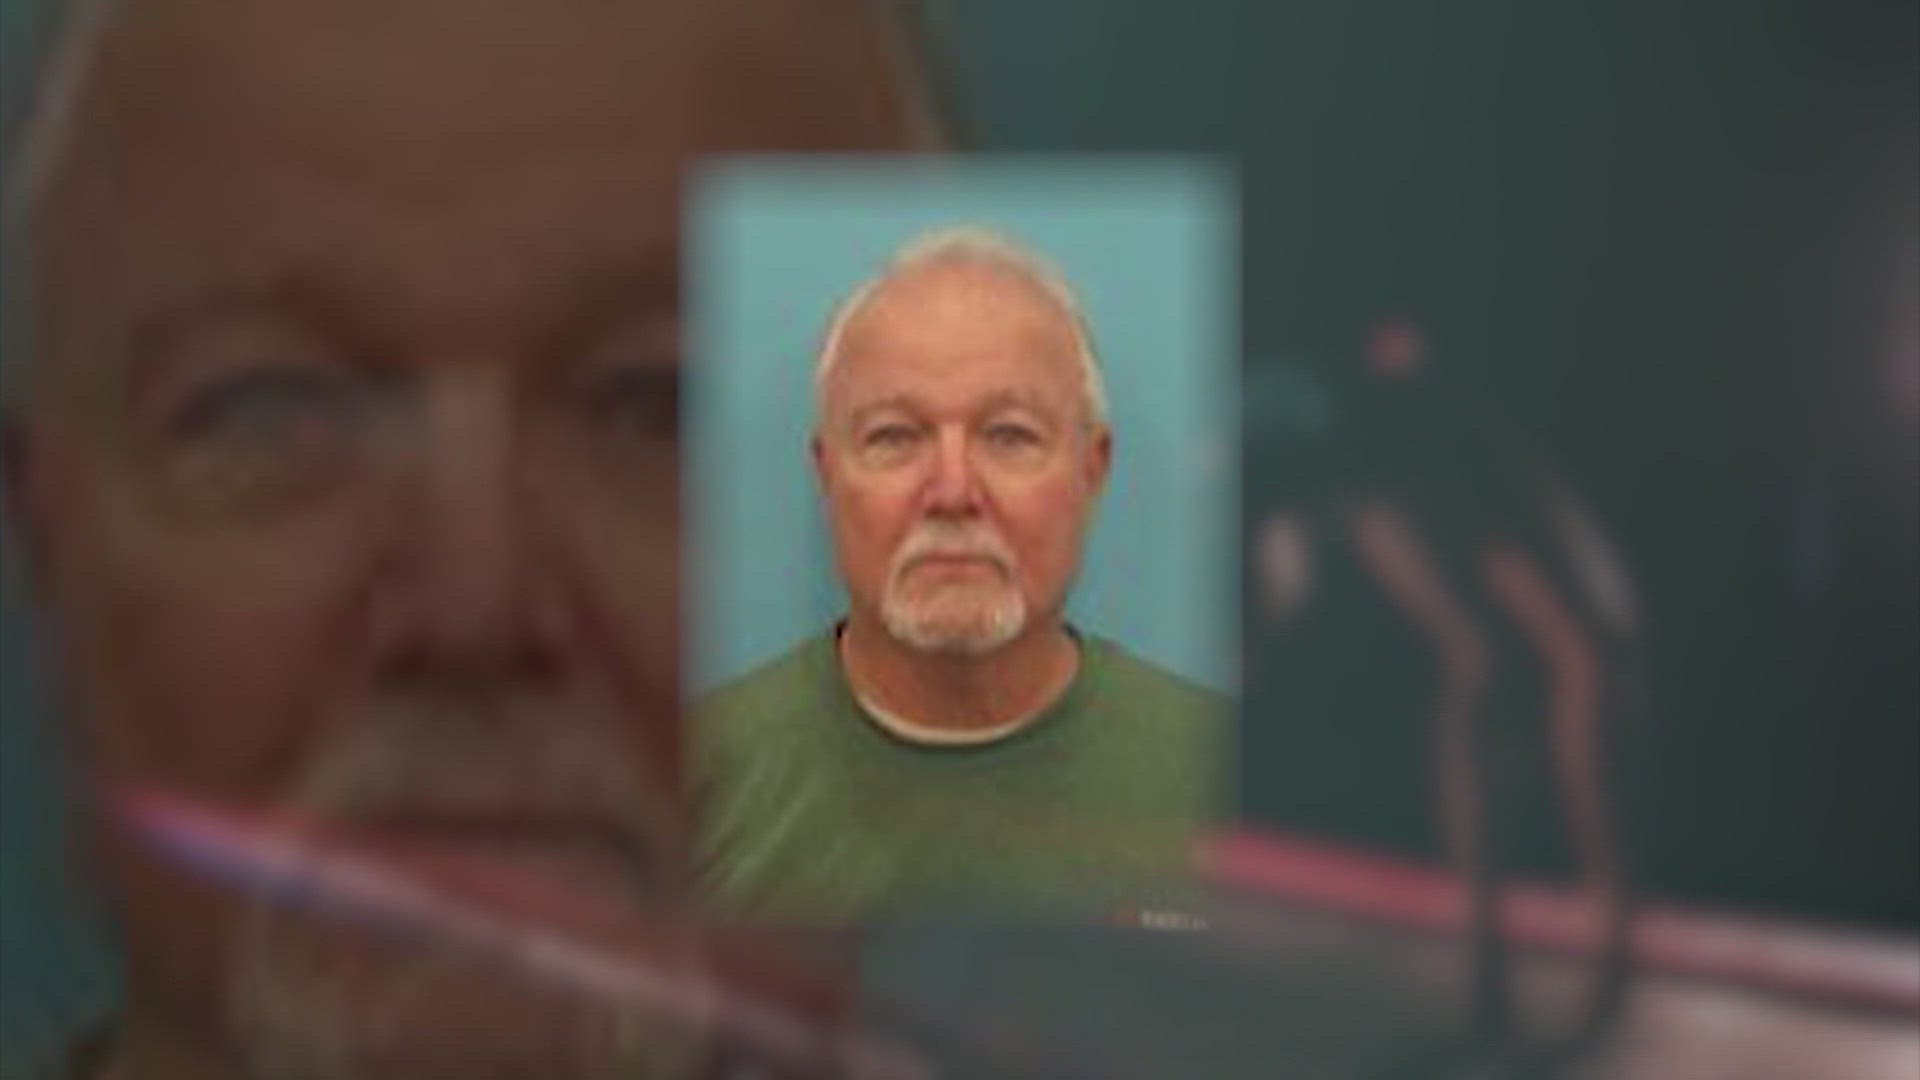 Michael Spiller, 75, was jailed in Kendall County in 2022 after allegations that the coach exposed himself to young girls.